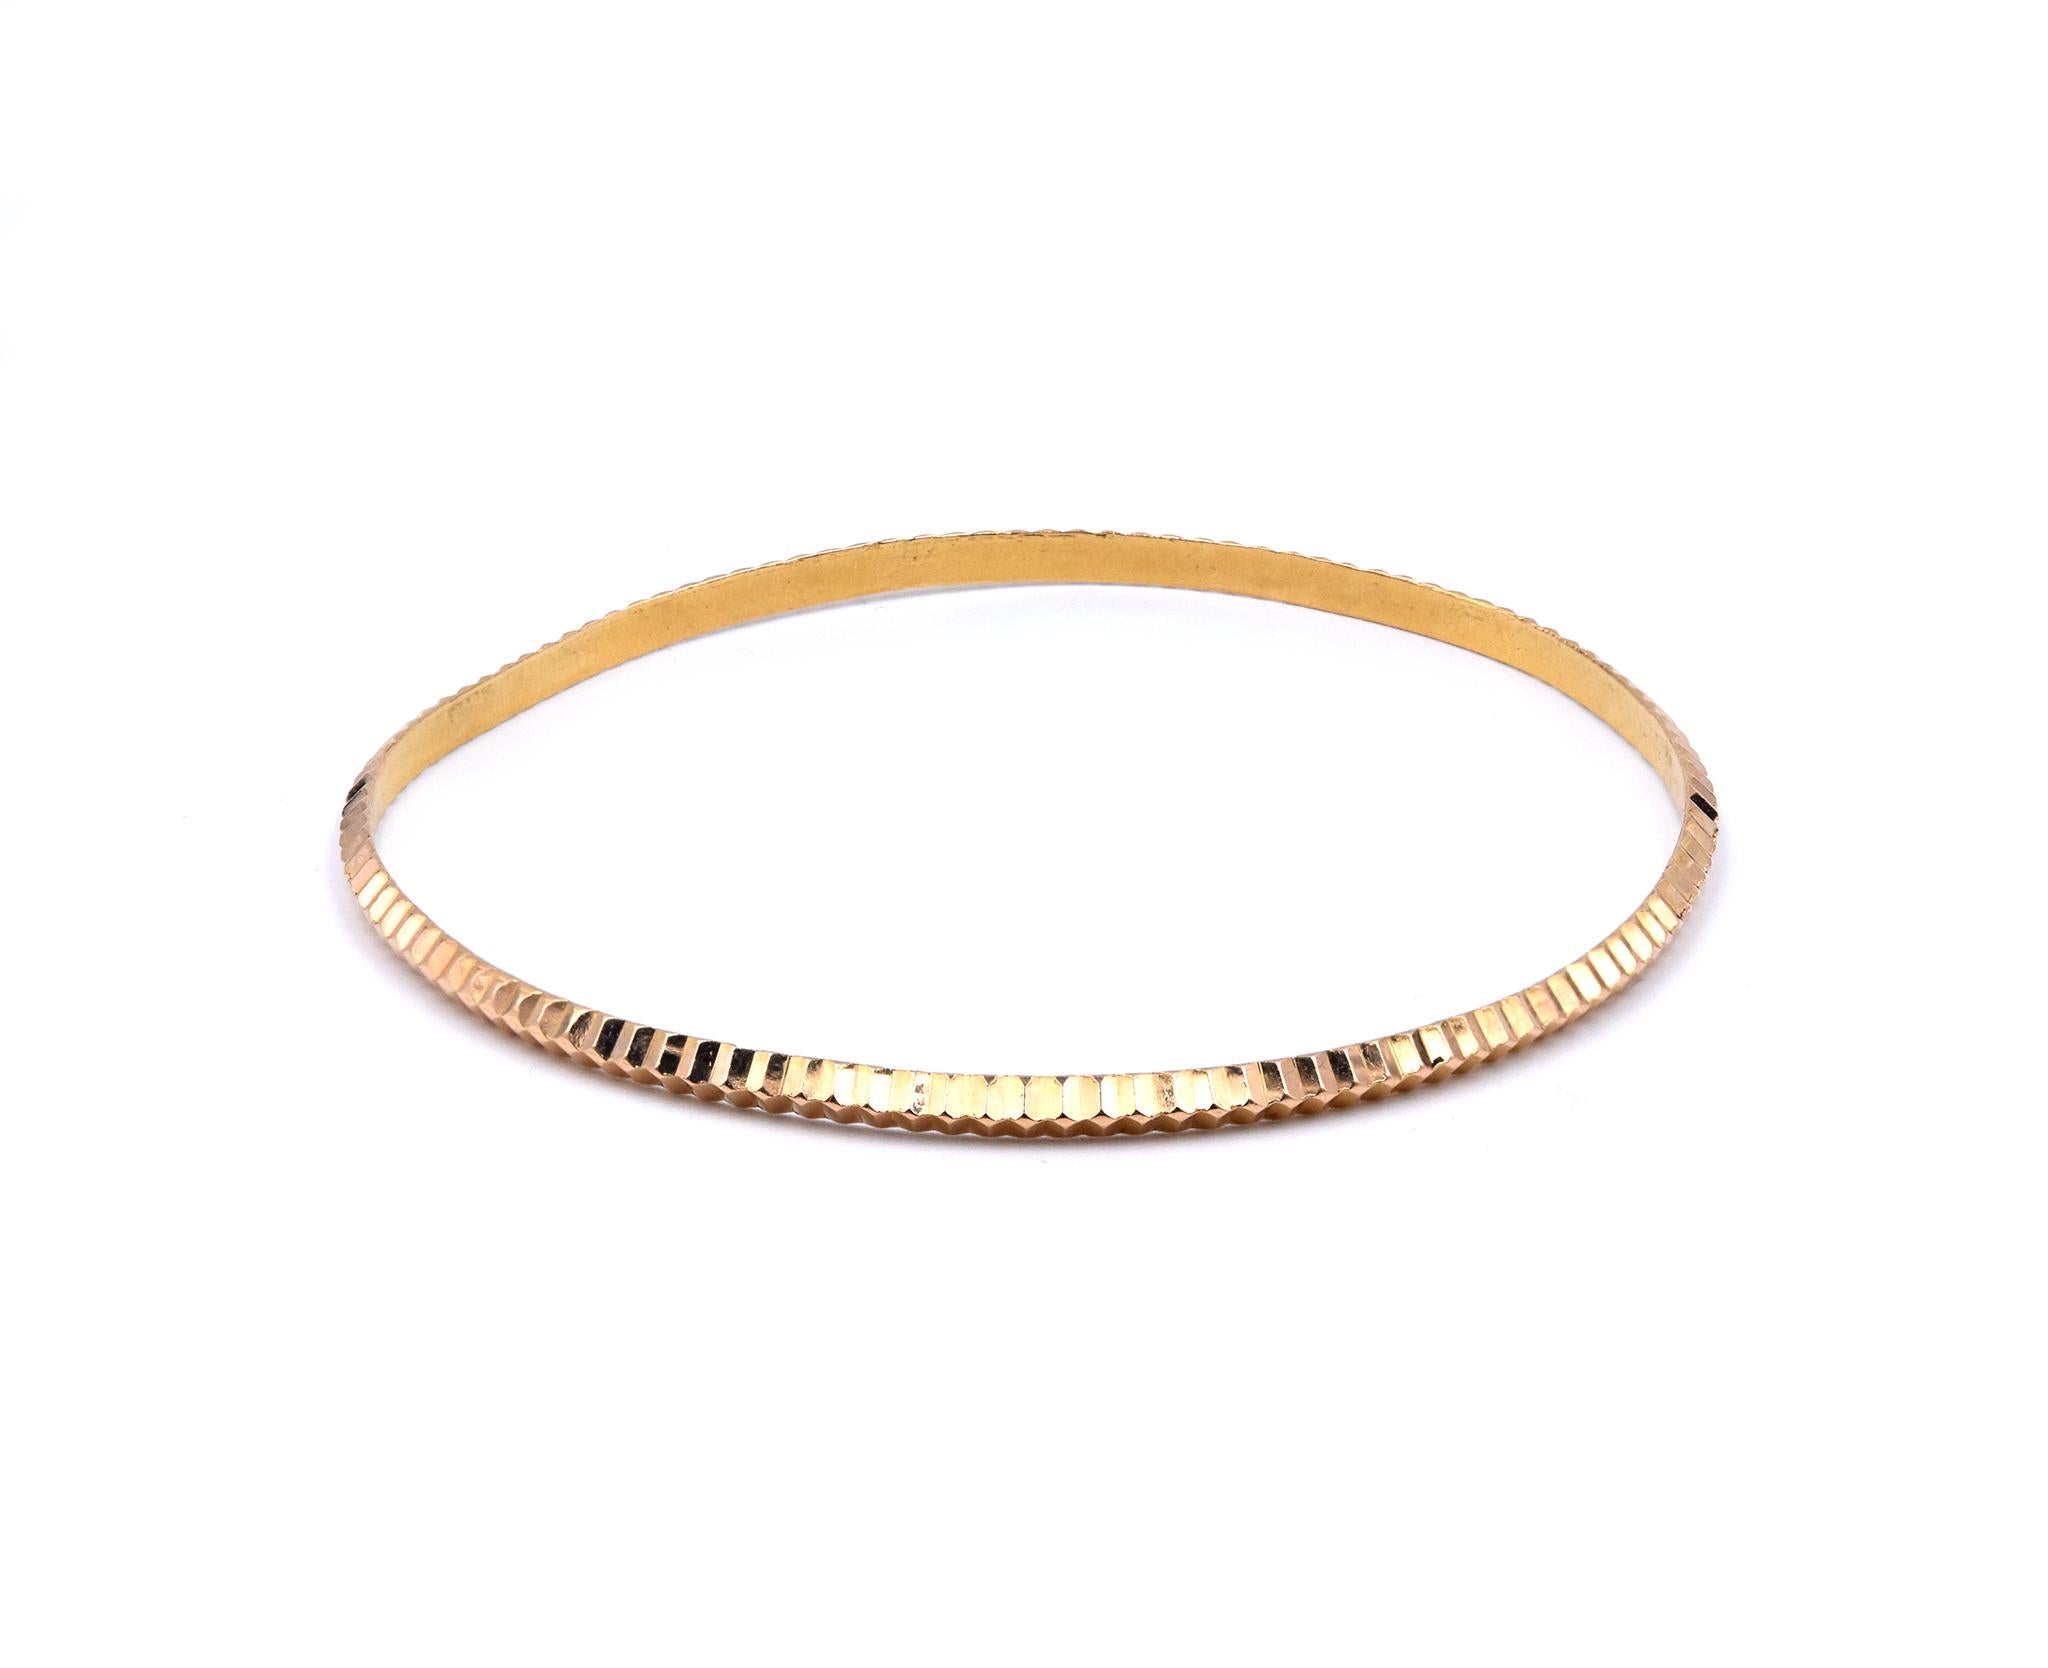 Designer: custom
Material: 21k yellow gold
Dimensions: the bracelet will fit up to a 8-inch wrist
Weight: 9.45 grams
